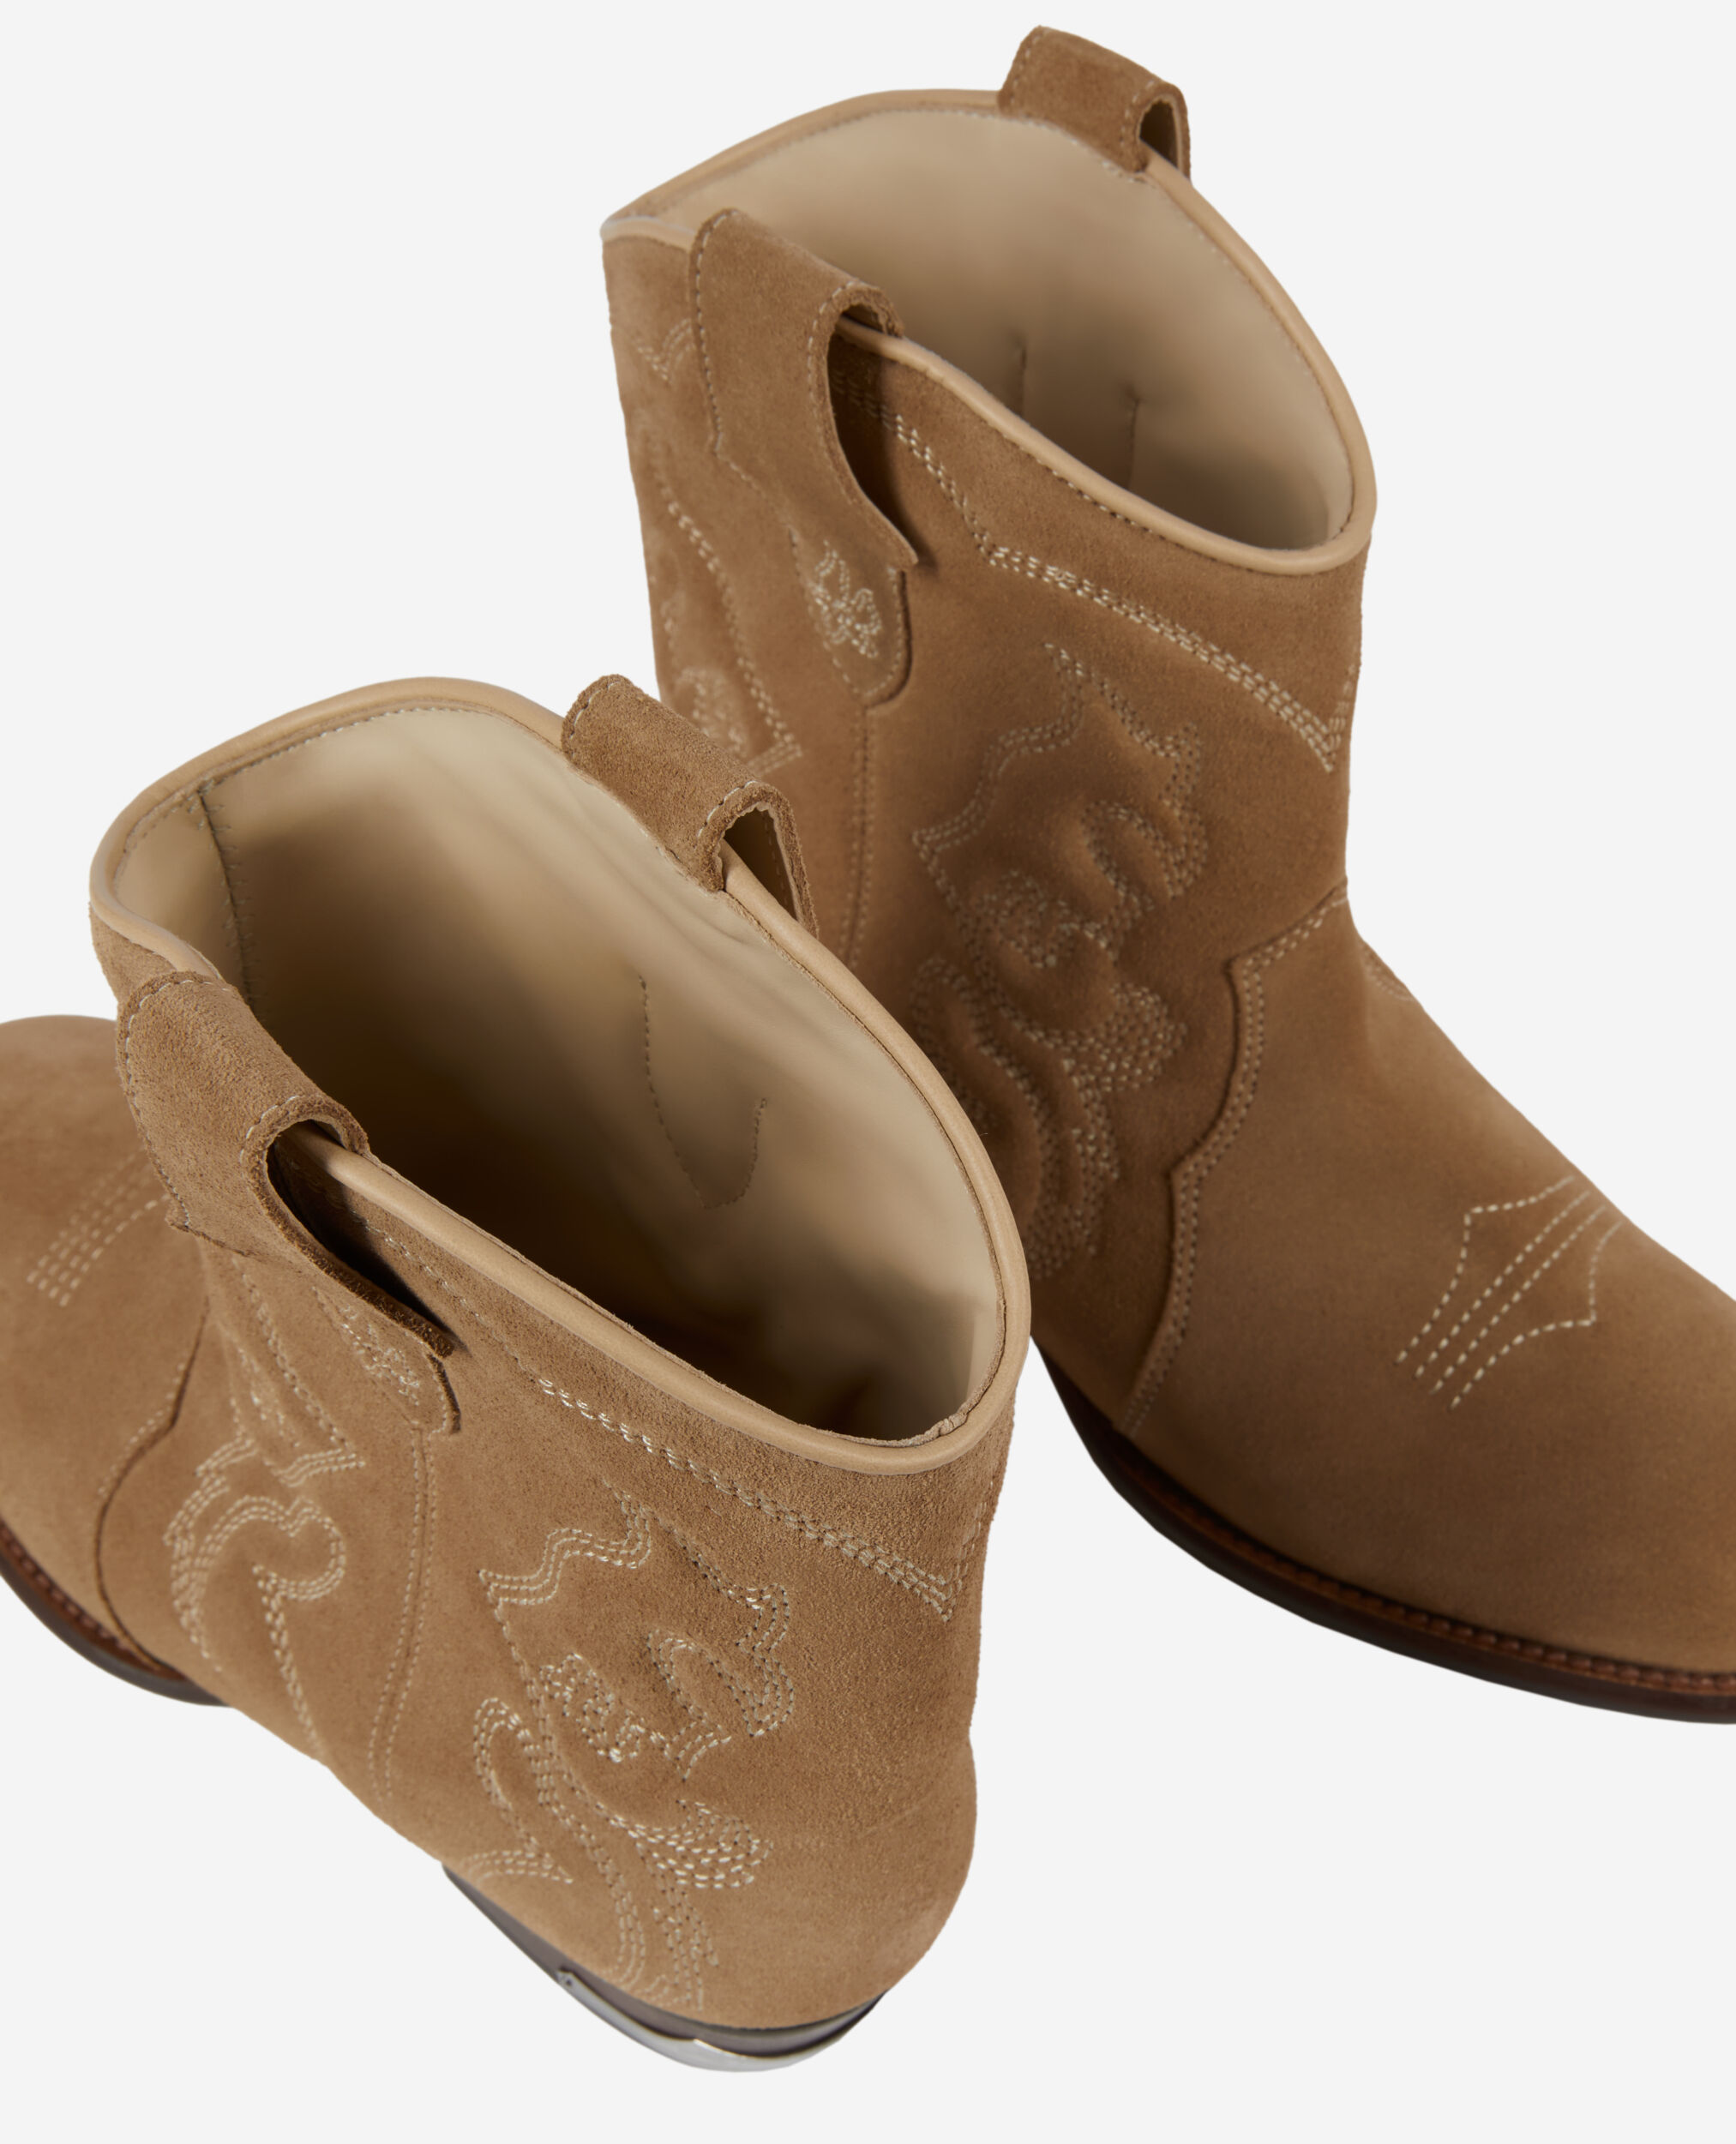 Western ankle boots in beige suede leather, BROWN, hi-res image number null